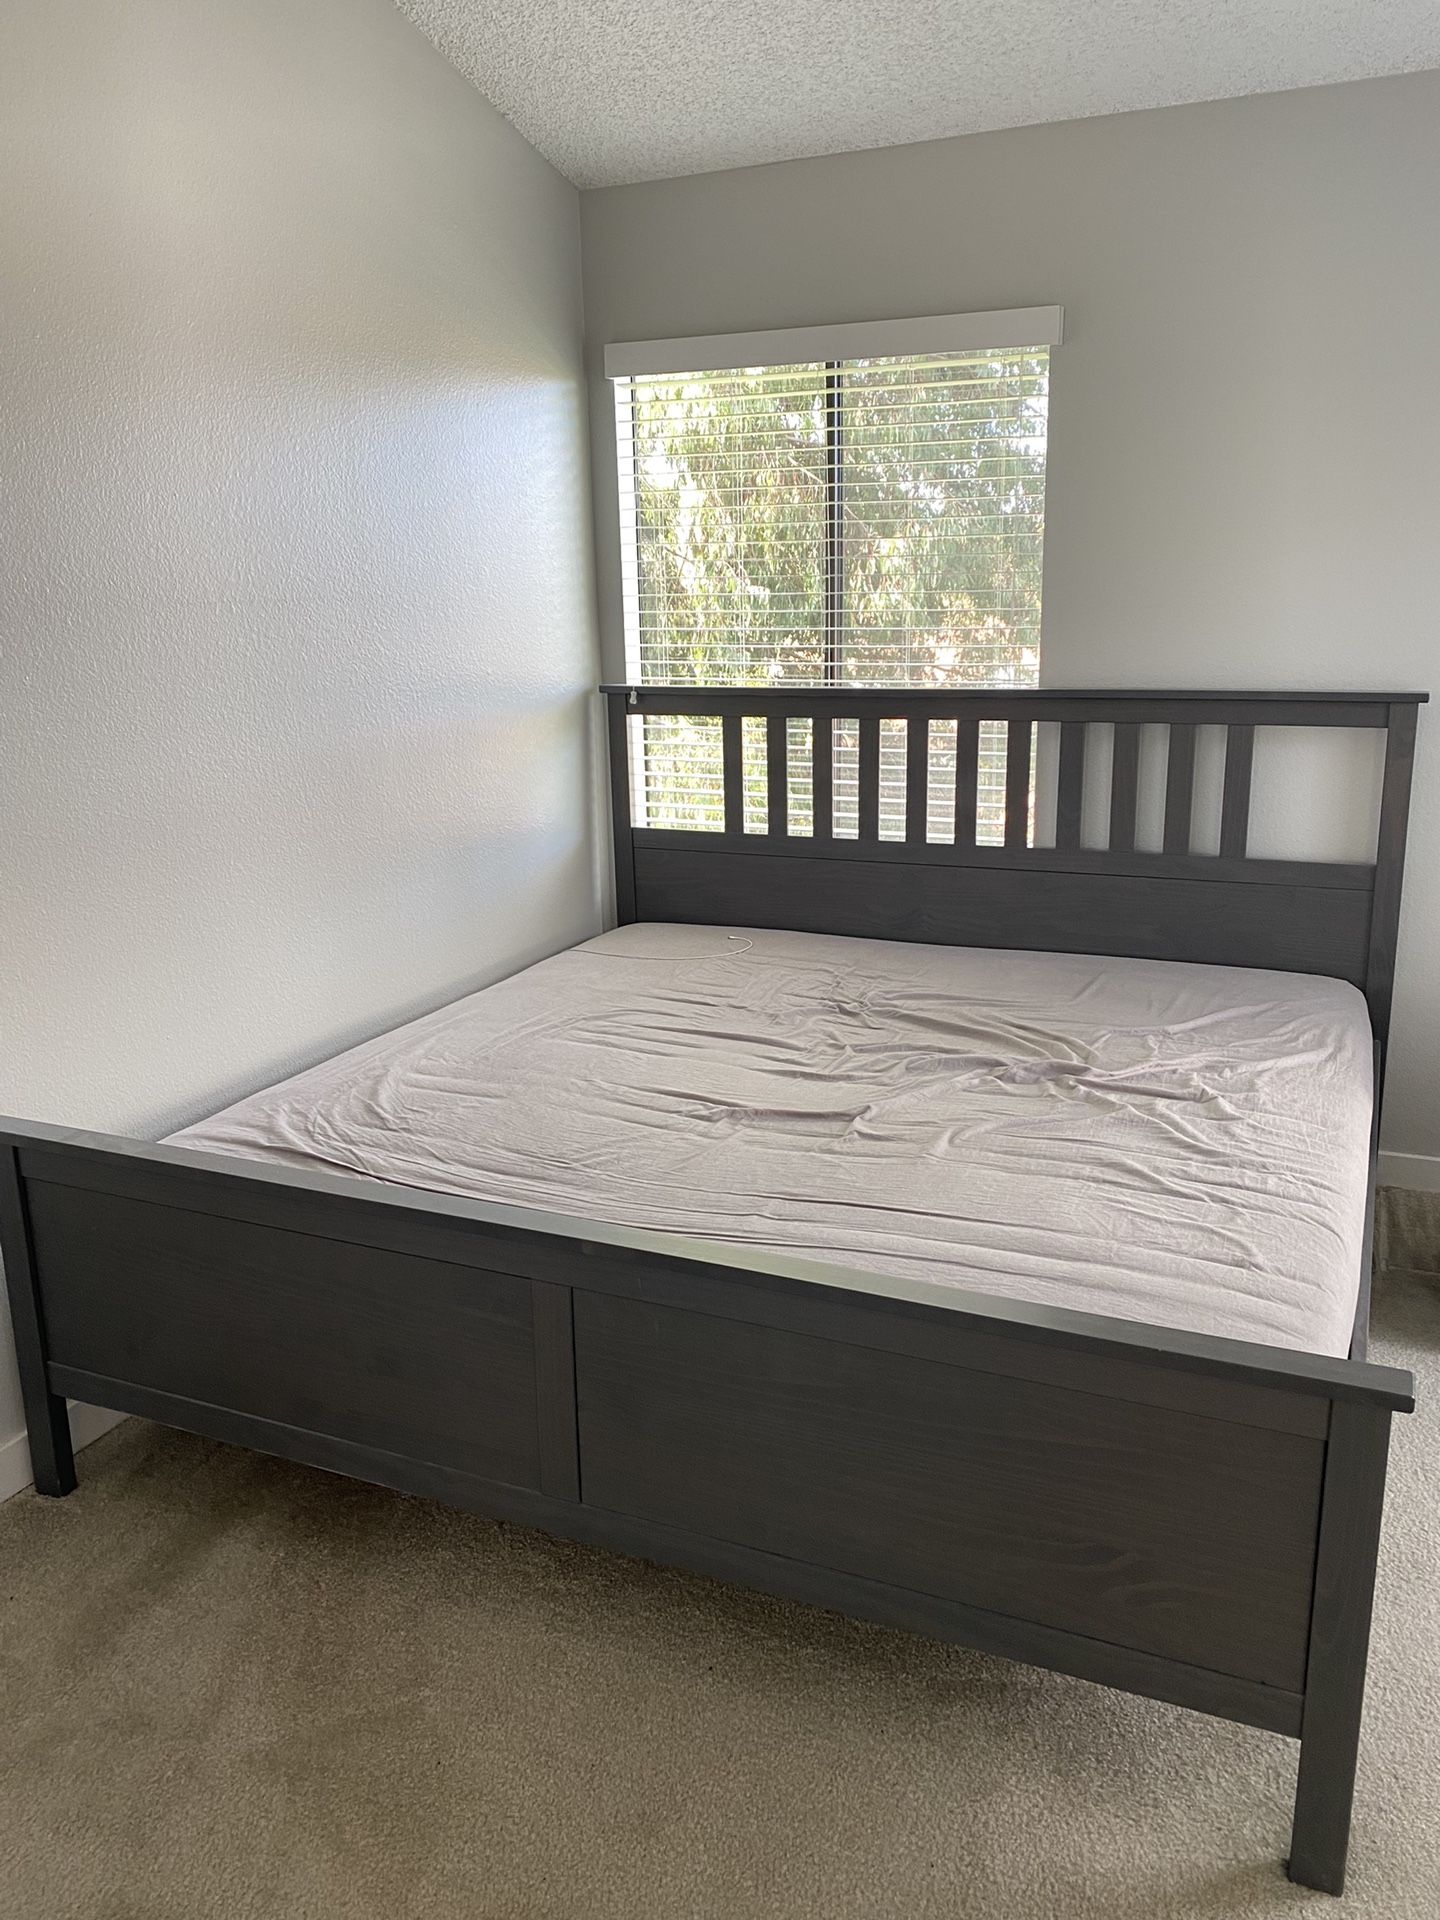 IKEA King Size Bed & Mattress (Used) For Sale